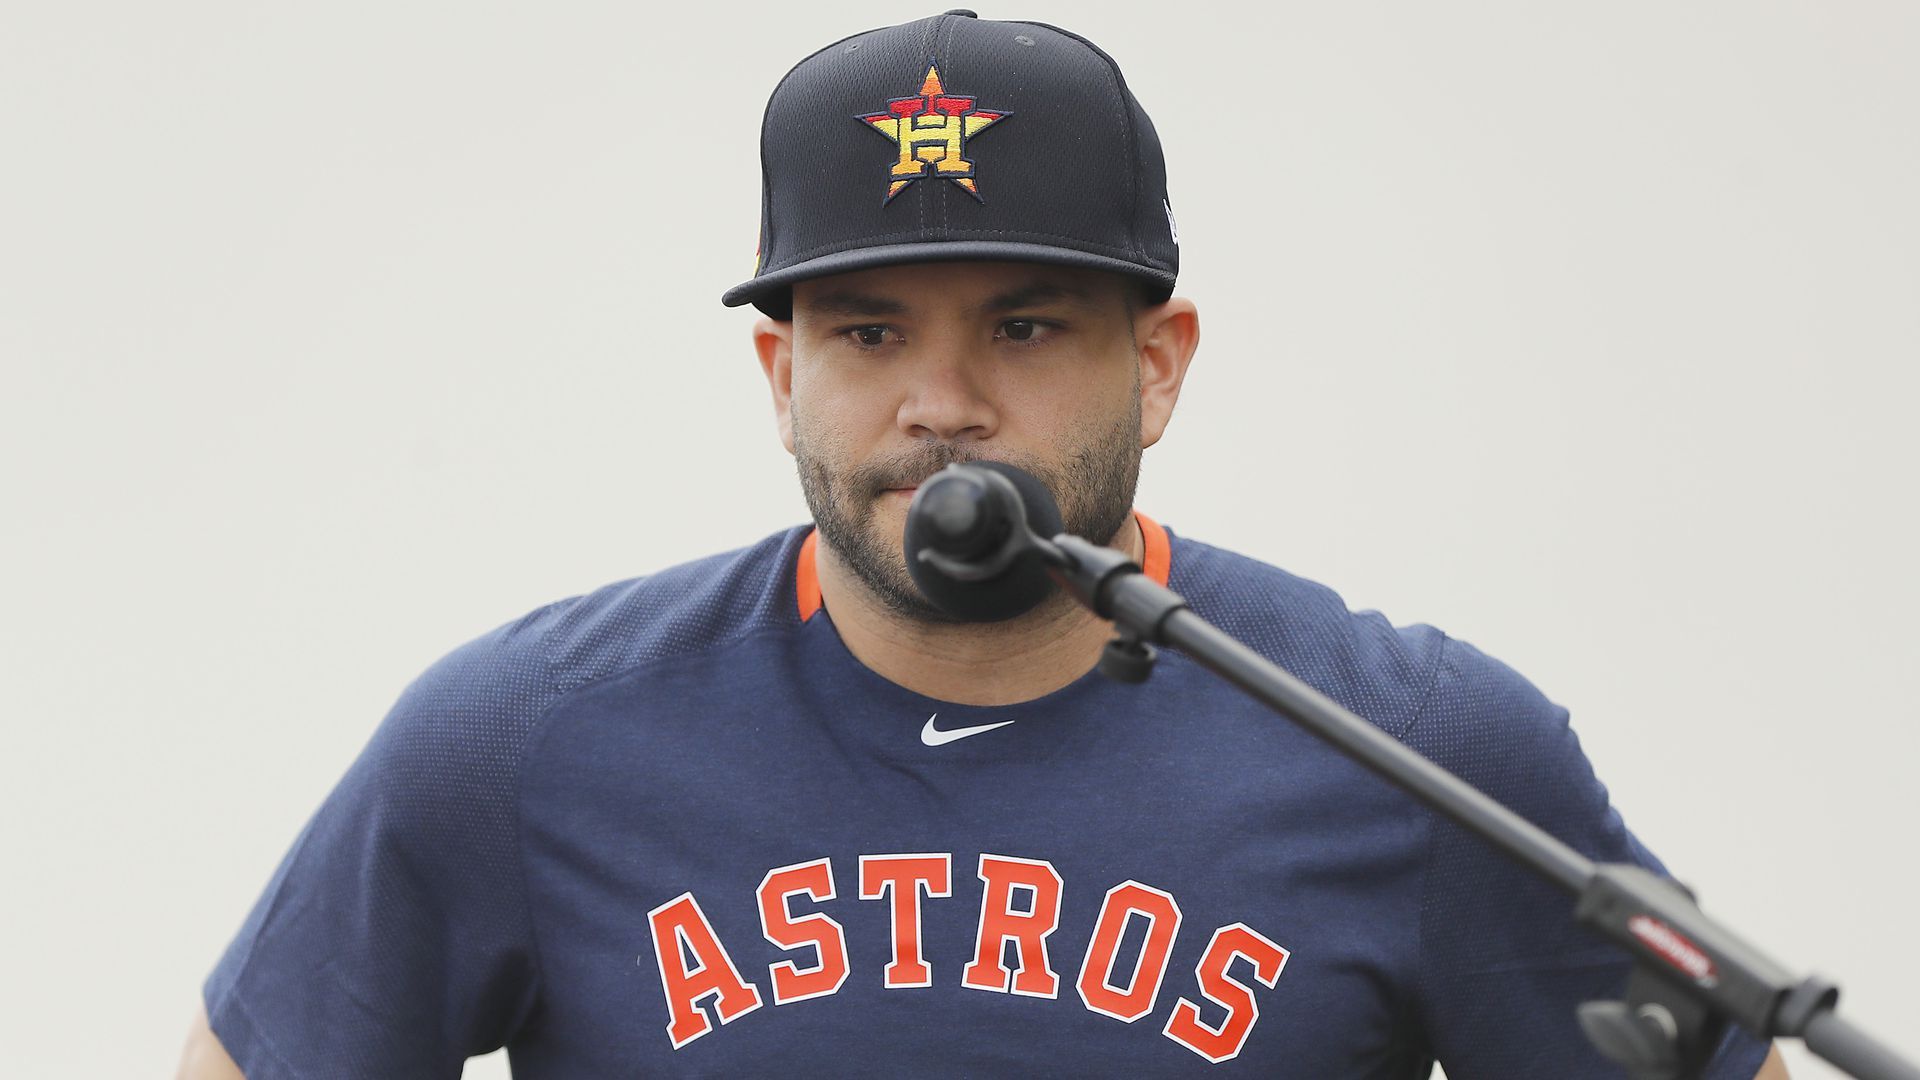 The Astros' Jose Altuve during a press conference in West Palm Beach.